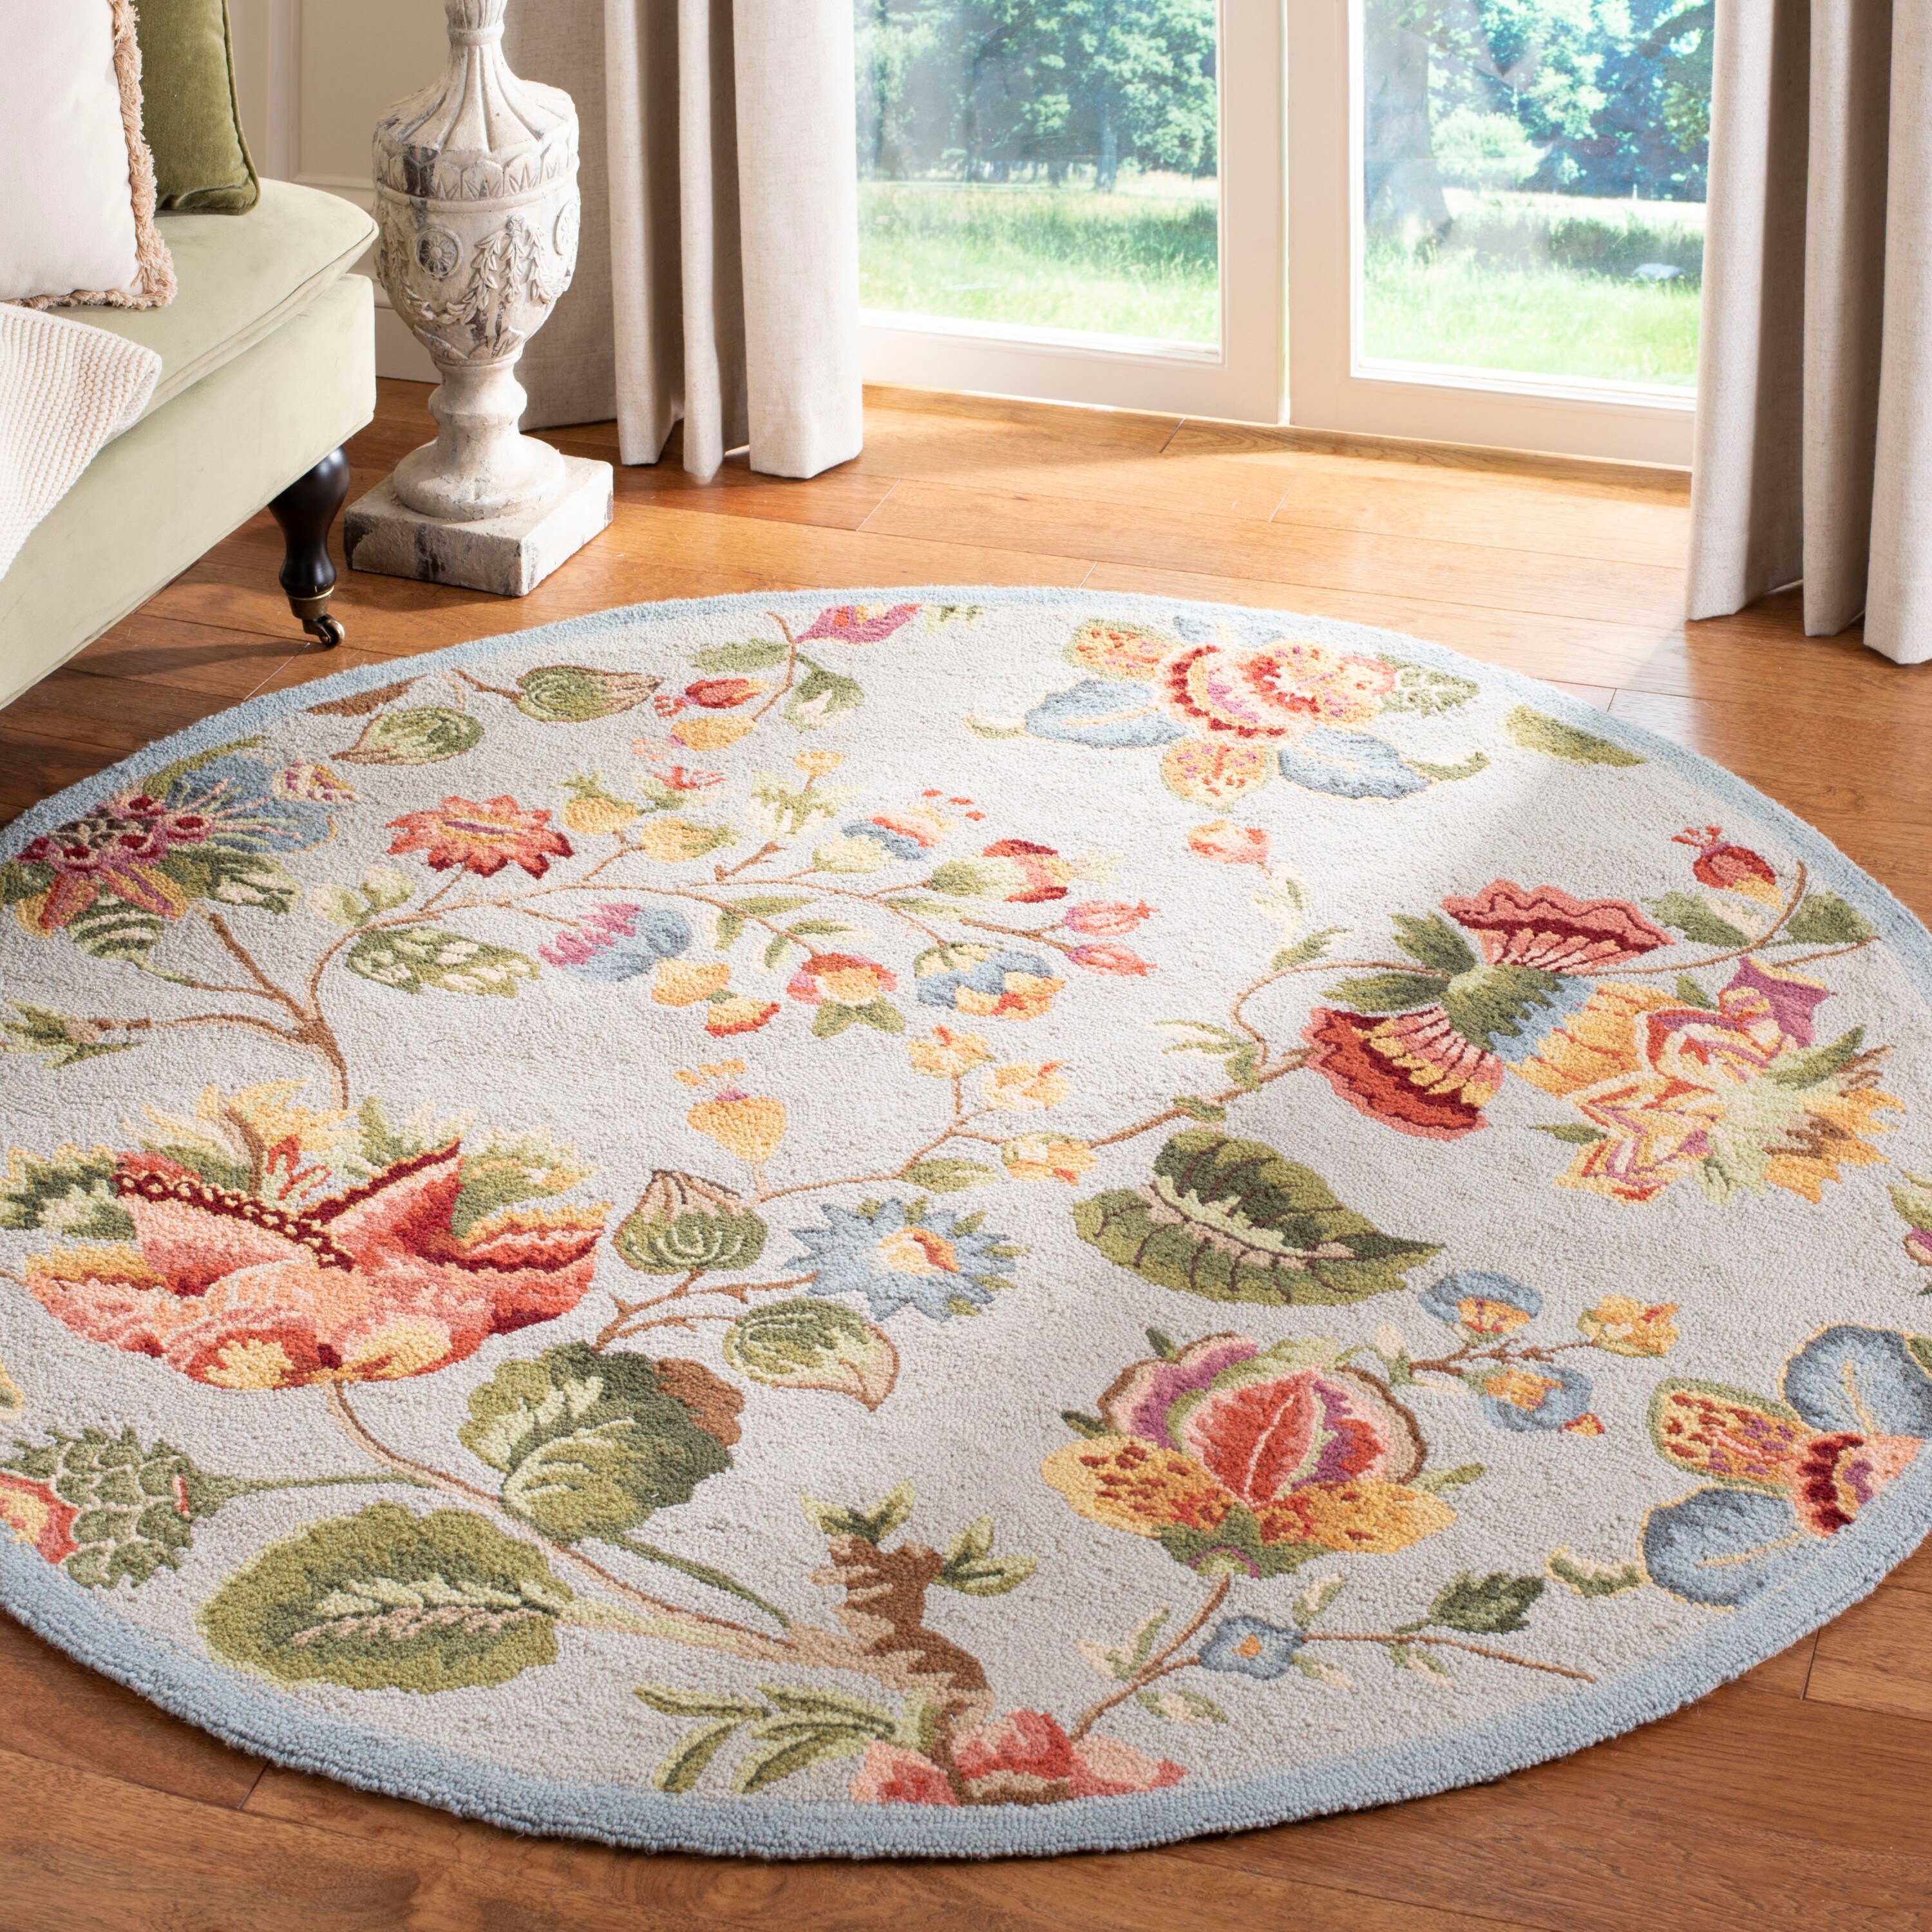 Safavieh Chelsea Lore 4 X 4 (ft) Wool Multi/Light Blue Round Indoor  Floral/Botanical Area Rug in the Rugs department at